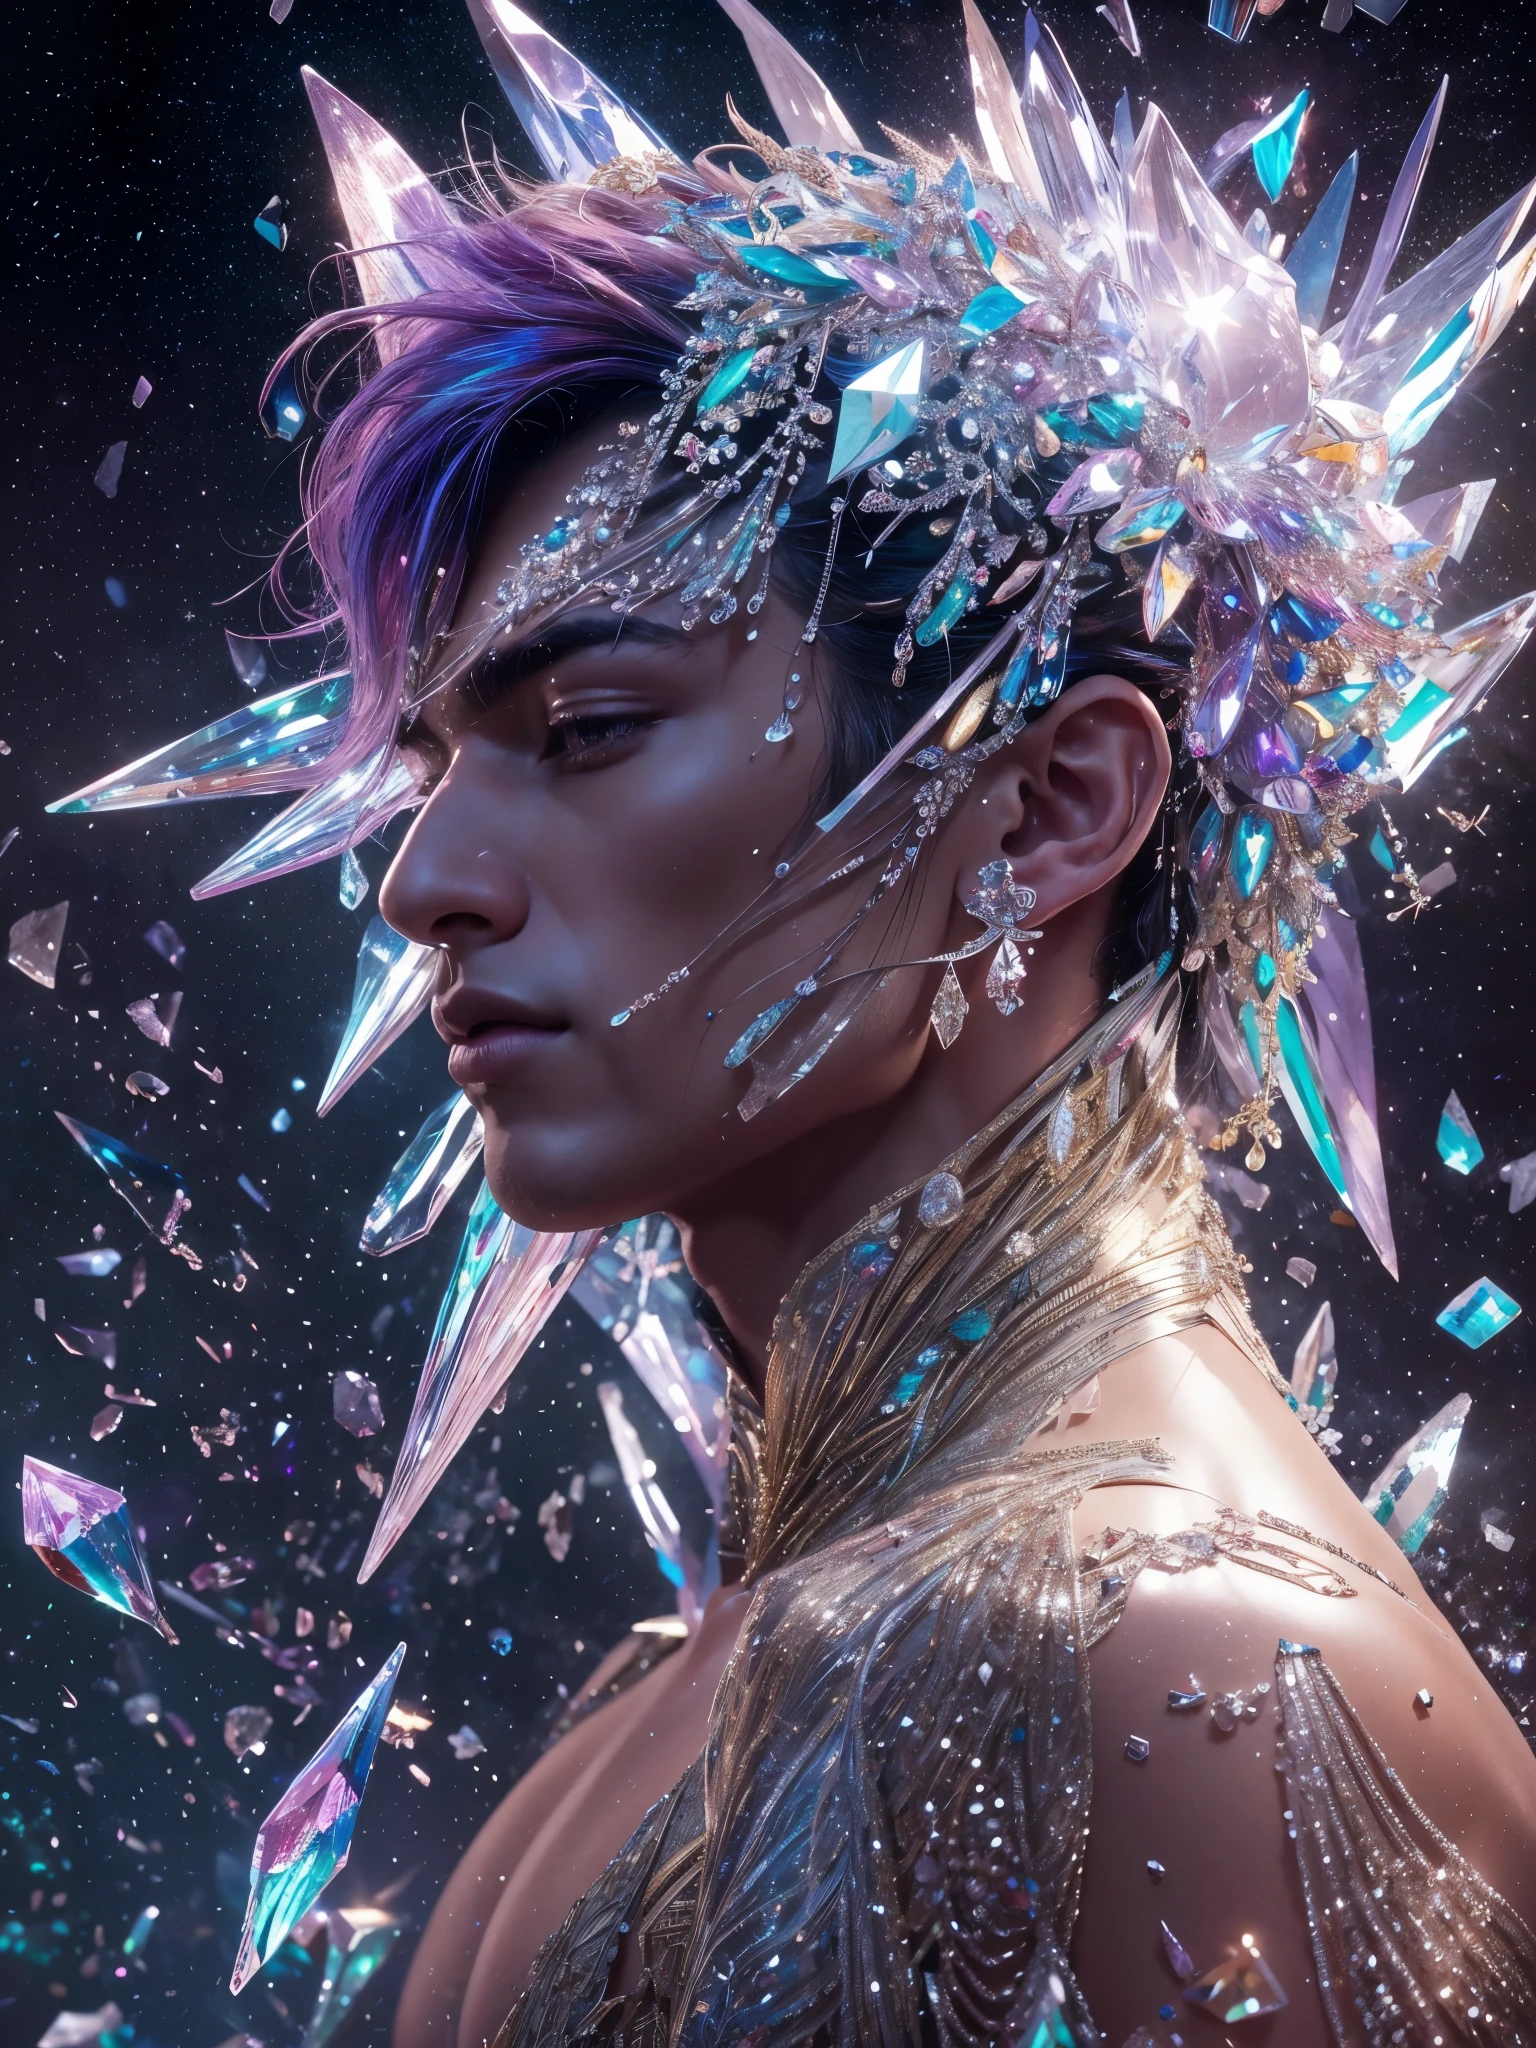 (photorealistic, masterpiece, best quality, highres, highly detailed), a young and handsome man posing nude surrounded by crystal, personification of crystal as a man, 18-year-old man, vibrant colors, realistic lighting, sparkling reflections, radiant and transparent skin, chiseled physique, intense gaze, striking features, well-defined jawline, tousled hair, confident and relaxed posture, artistic composition, elegant and graceful pose, captivating and alluring expression, the man's body covered with delicate and intricate crystals, creating a mesmerizing and ethereal effect, immaculate attention to detail, flawless rendering of textures, harmonious blend of realism and fantasy, incredible depth and dimension, attention-grabbing contrast between the smoothness of the man's skin and the texture of the crystals, seamless integration of the human form with the crystal surroundings, evoking a sense of grace, beauty, and mystery, powerful symbolism of purity and strength embodied by the crystal elements, expert use of shadows and highlights to enhance the three-dimensional quality of the image, masterful use of color to create a dreamlike atmosphere, refined and subtle nuances of light and shade, creating a visually stunning and emotionally impactful scene, exquisite craftsmanship and skillful execution, capturing the essence of both the human form and the ethereal beauty of crystals, creating an unforgettable and awe-inspiring visual experience.